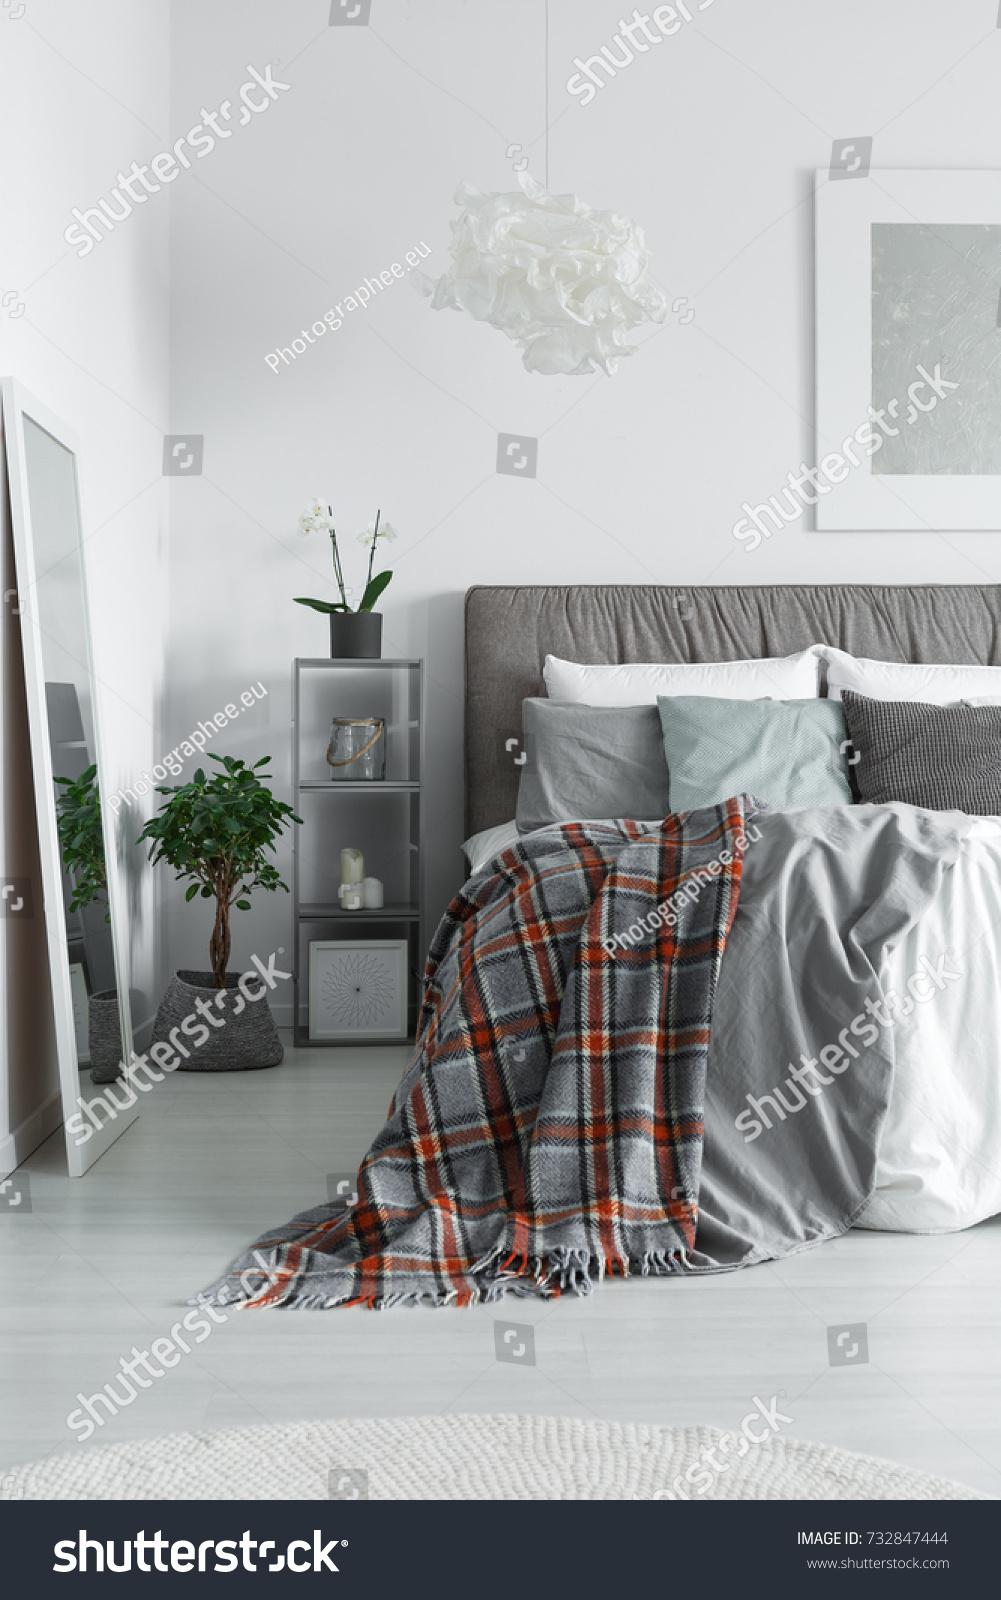 Cozy interior of a monochromatic bedroom with a king-size bed and checkered bedclothes lying on it #732847444